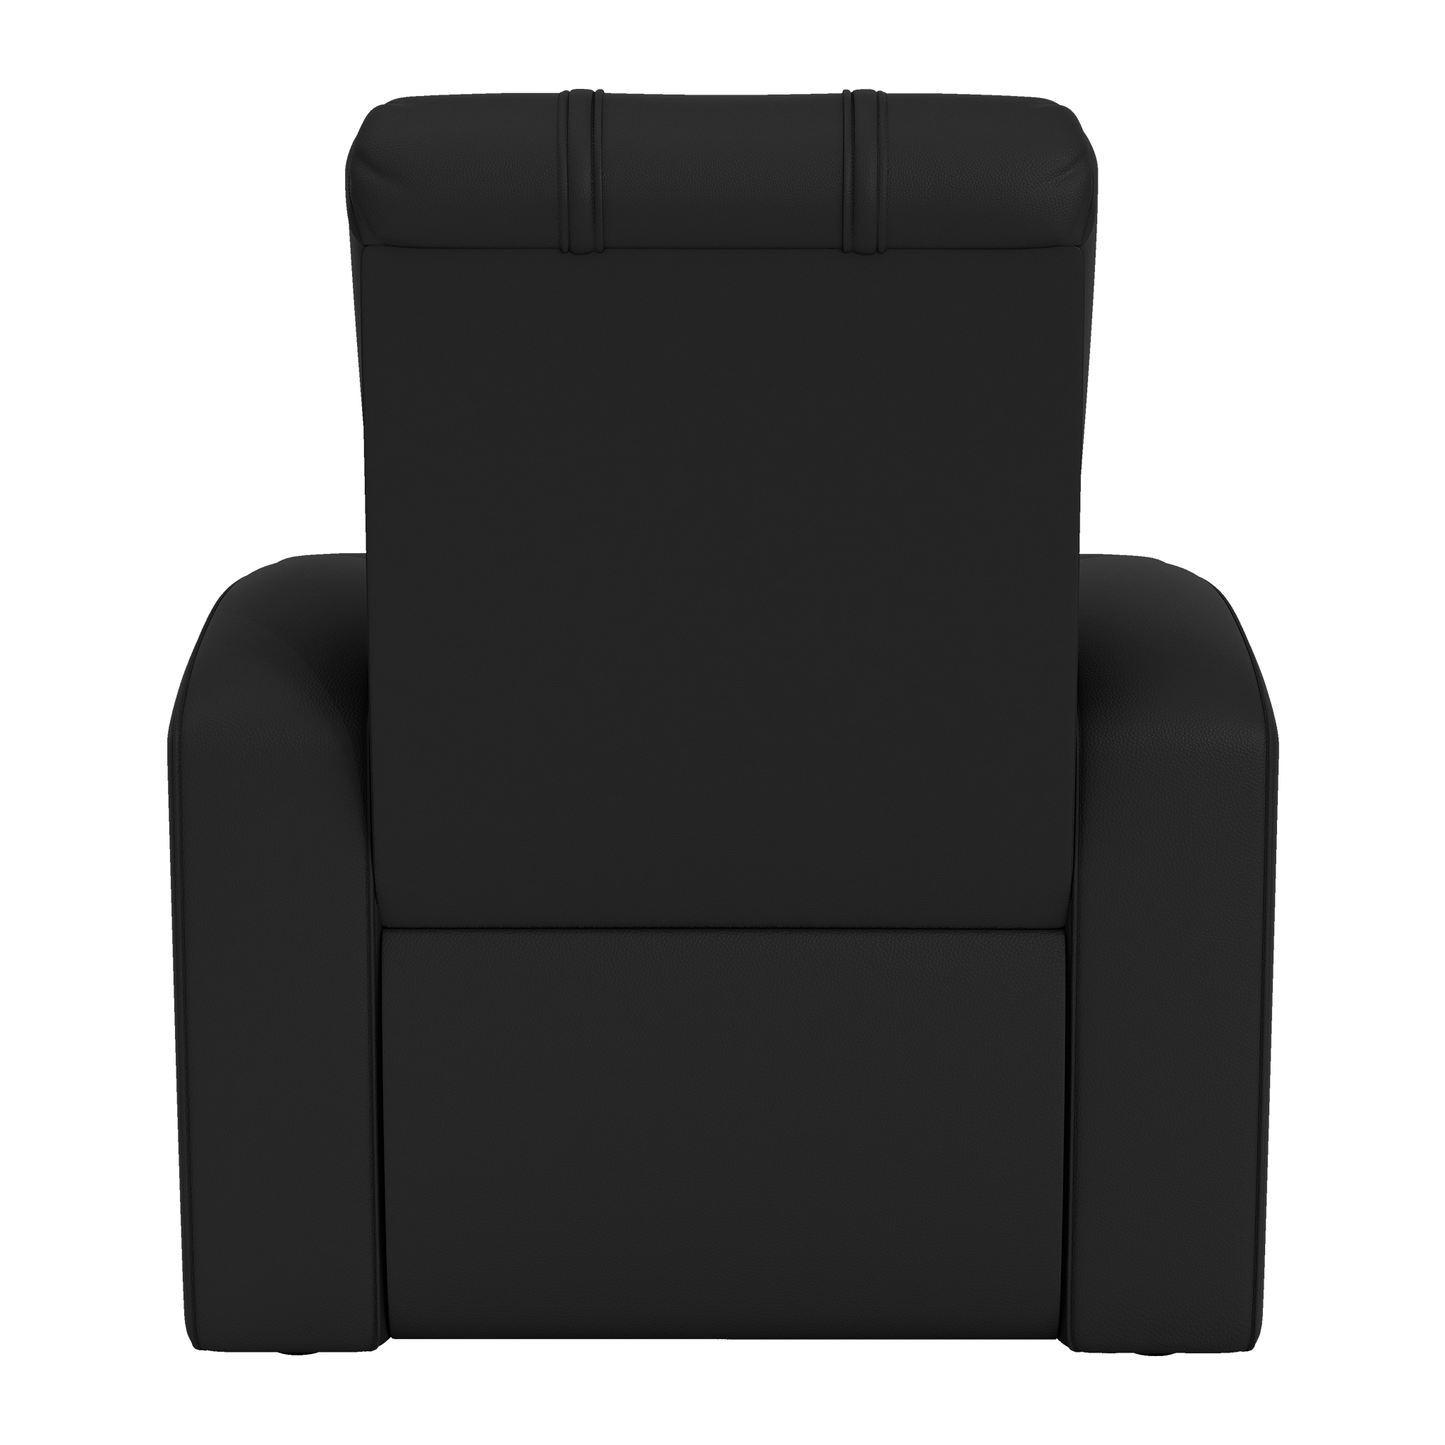 Relax Home Theater Recliner with Atlanta Falcons Secondary Logo